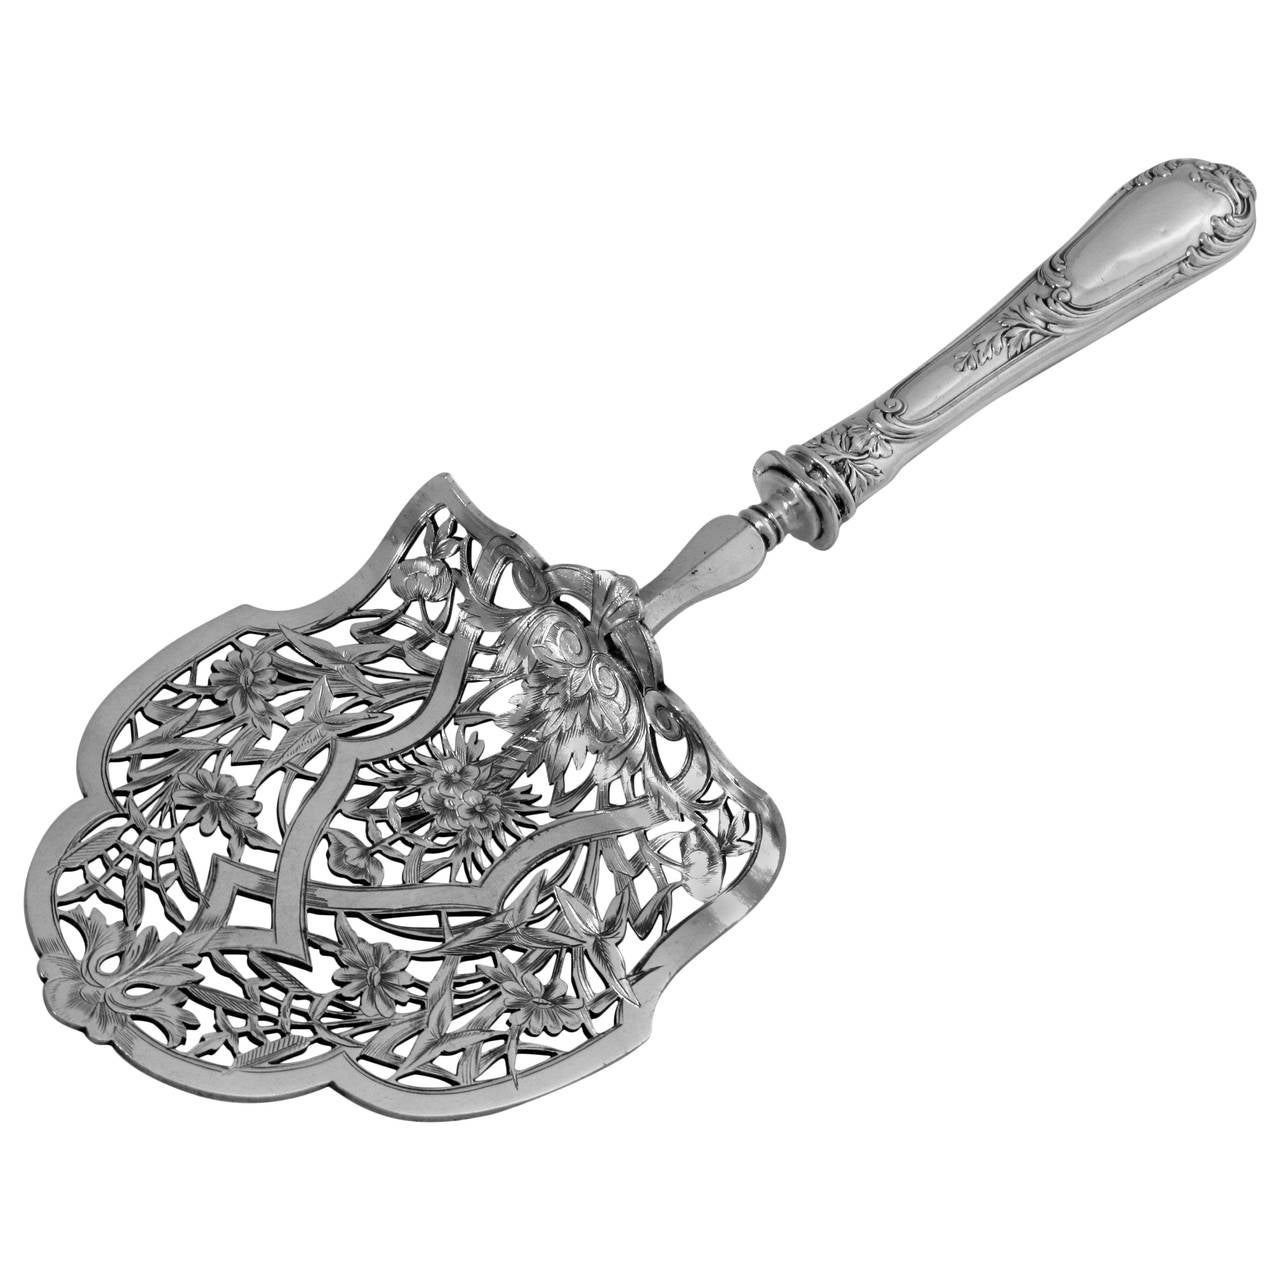 Soufflot Fabulous French Sterling Silver Asparagus/Pastry/Toast Server Rococo For Sale